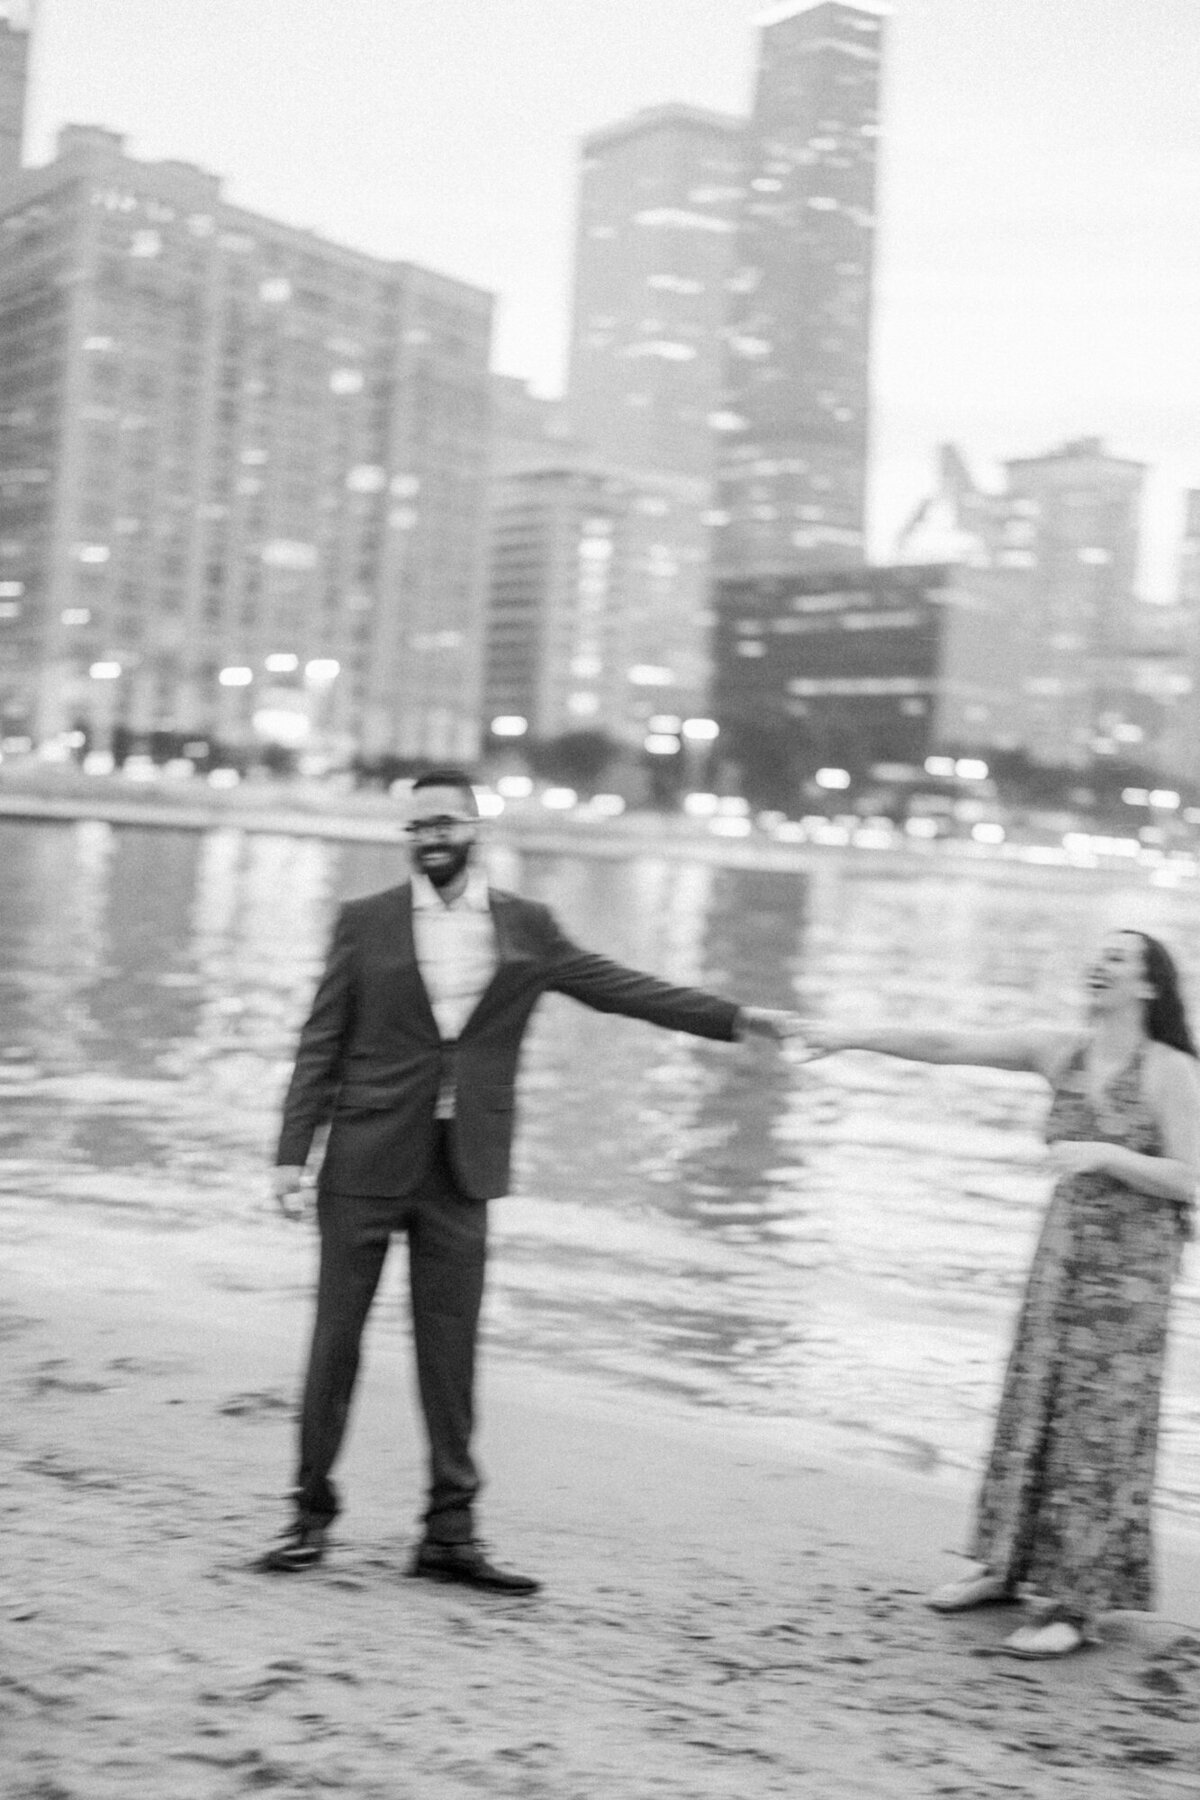 A blurry, black and white engagement photo that shows movement and joy